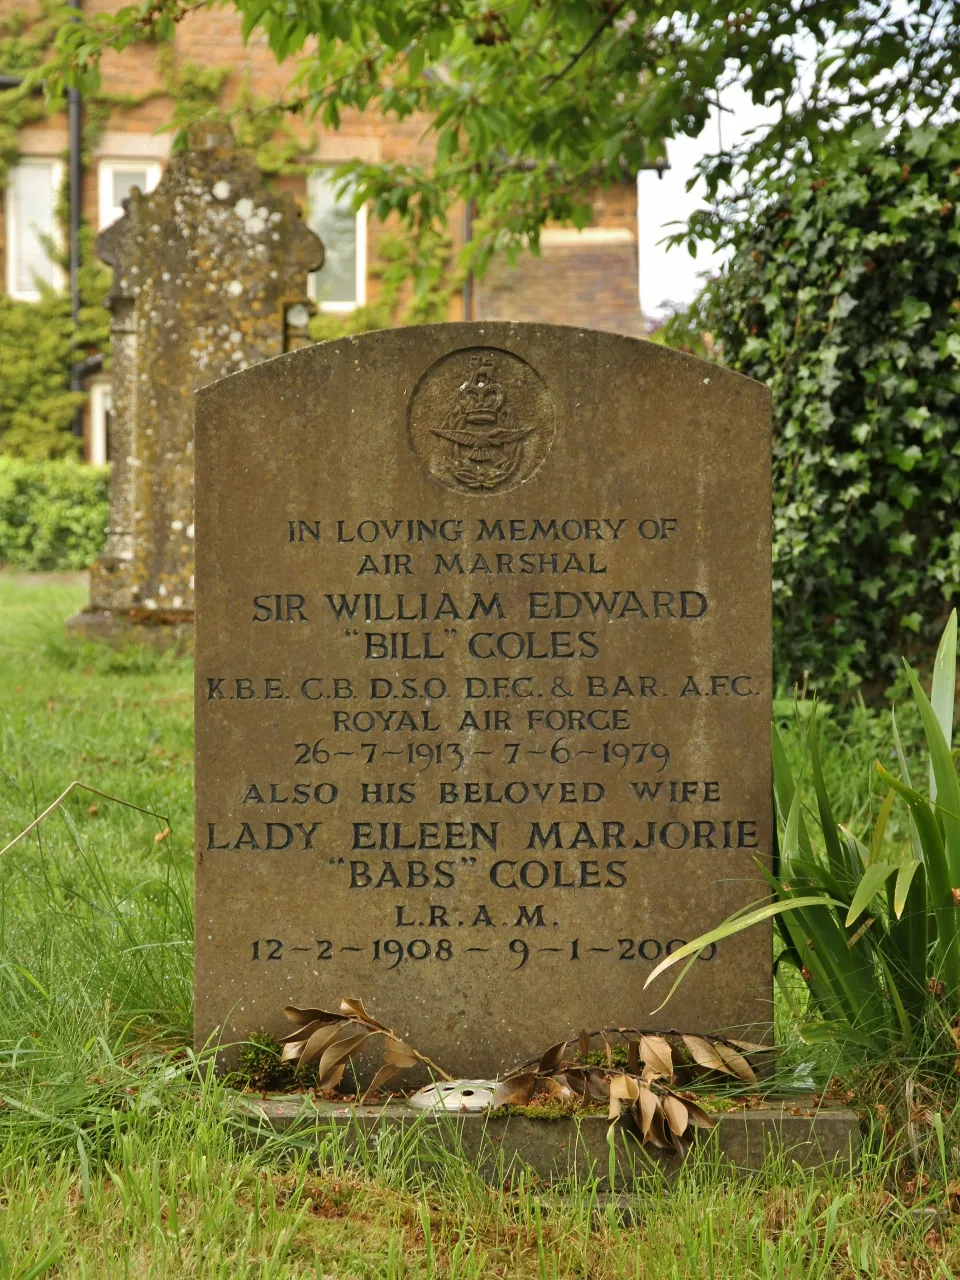 Photo showing: Headstone in Holy Trinity parish churchyard, Shenington, Oxfordshire to Air Marshal Sir WE Coles and Lady EM Coles